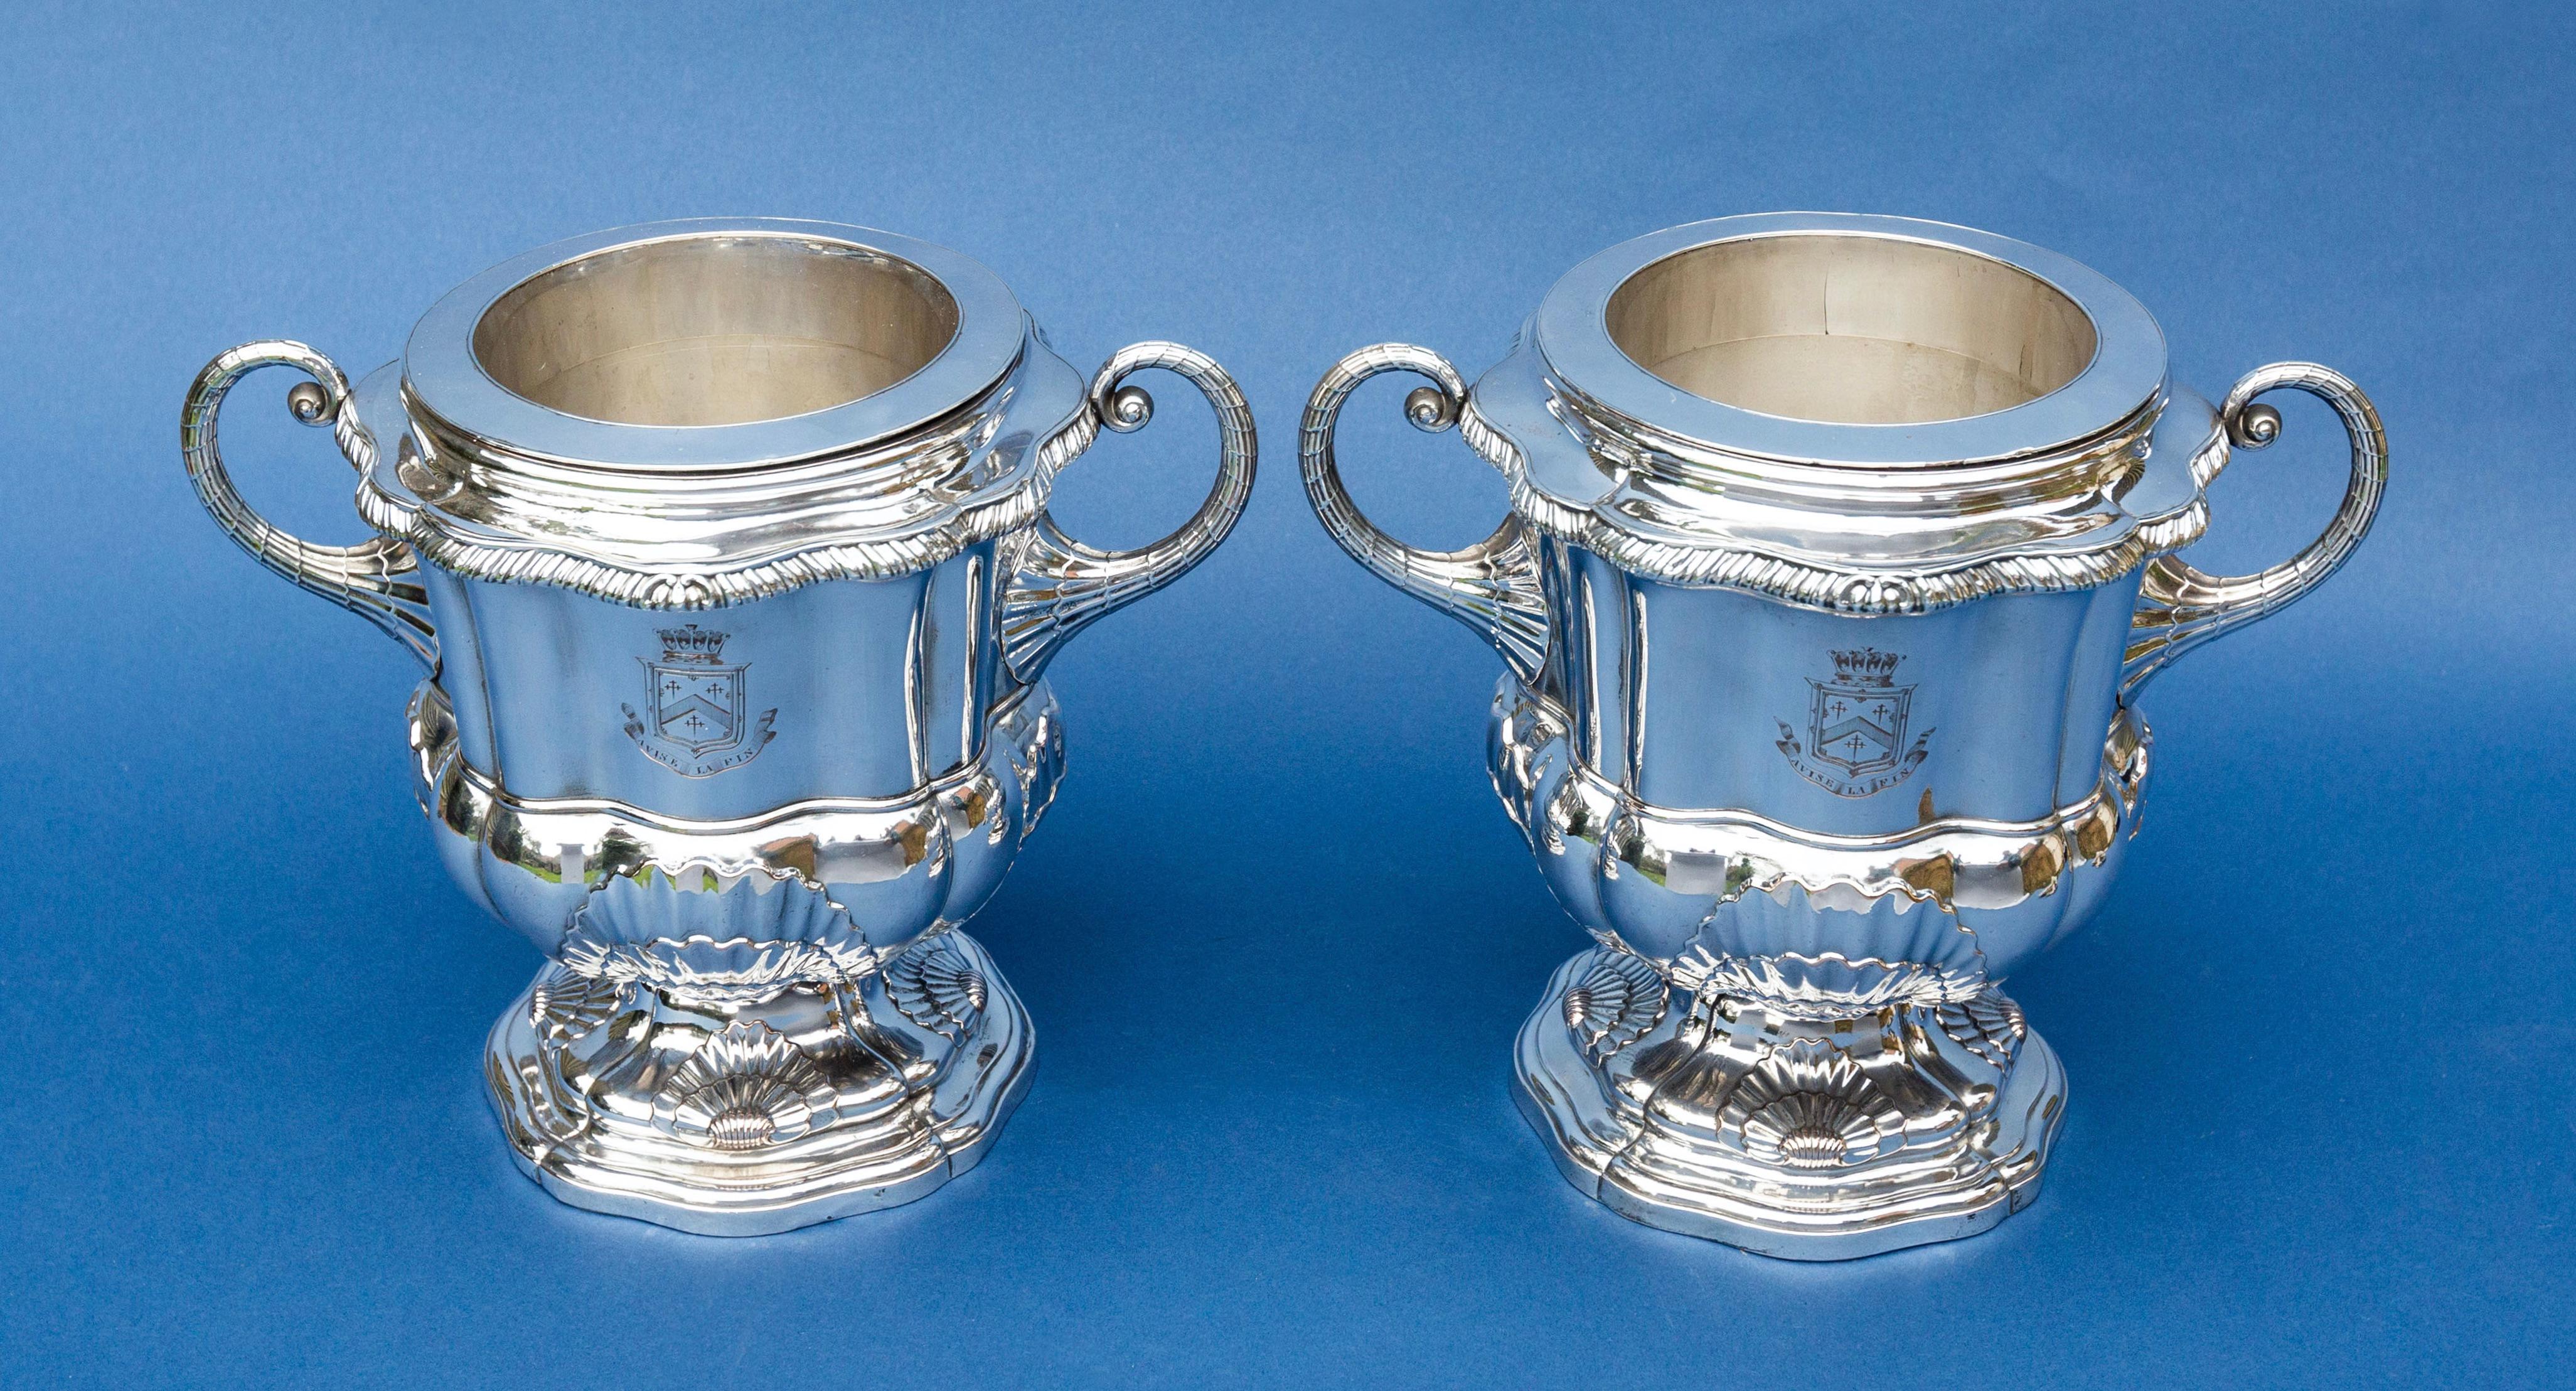 Pair of George IV Old Sheffield Plate two handled wine coolers, collars and liners, each engraved twice with the coat-of-arms and Earl's coronet of Archibald Kennedy, 1st Marquess of Ailsa (1770-1846), known as the 12th Earl of Cassillis from 1794